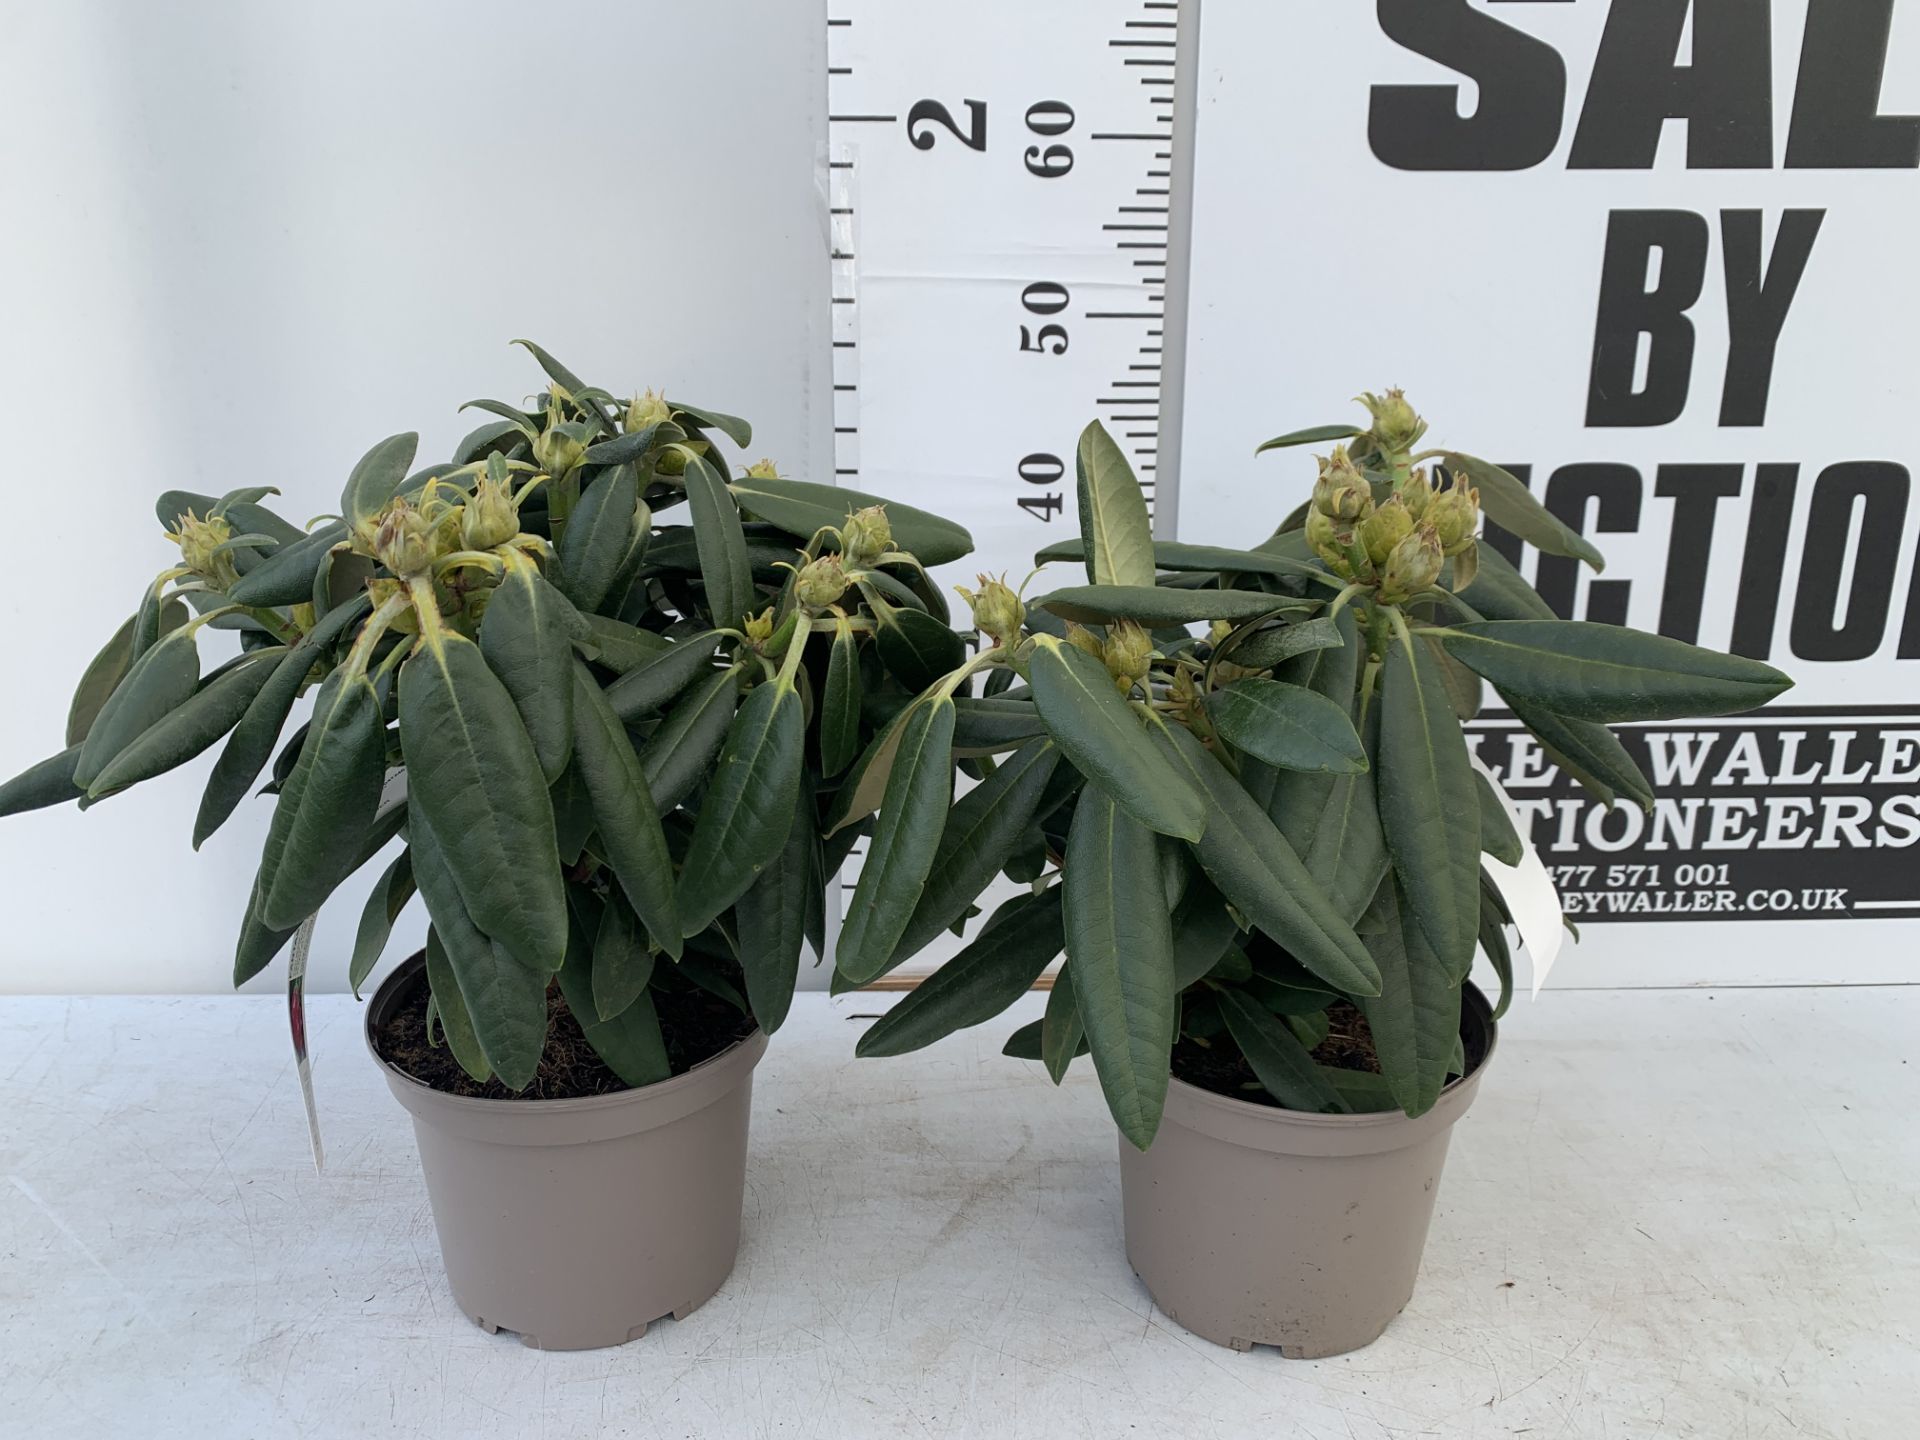 TWO RHODODENDRONS FANTASTICA RED IN 3 LTR POTS APPROX 70CM IN HEIGHT PLUS VAT TO BE SOLD FOR THE TWO